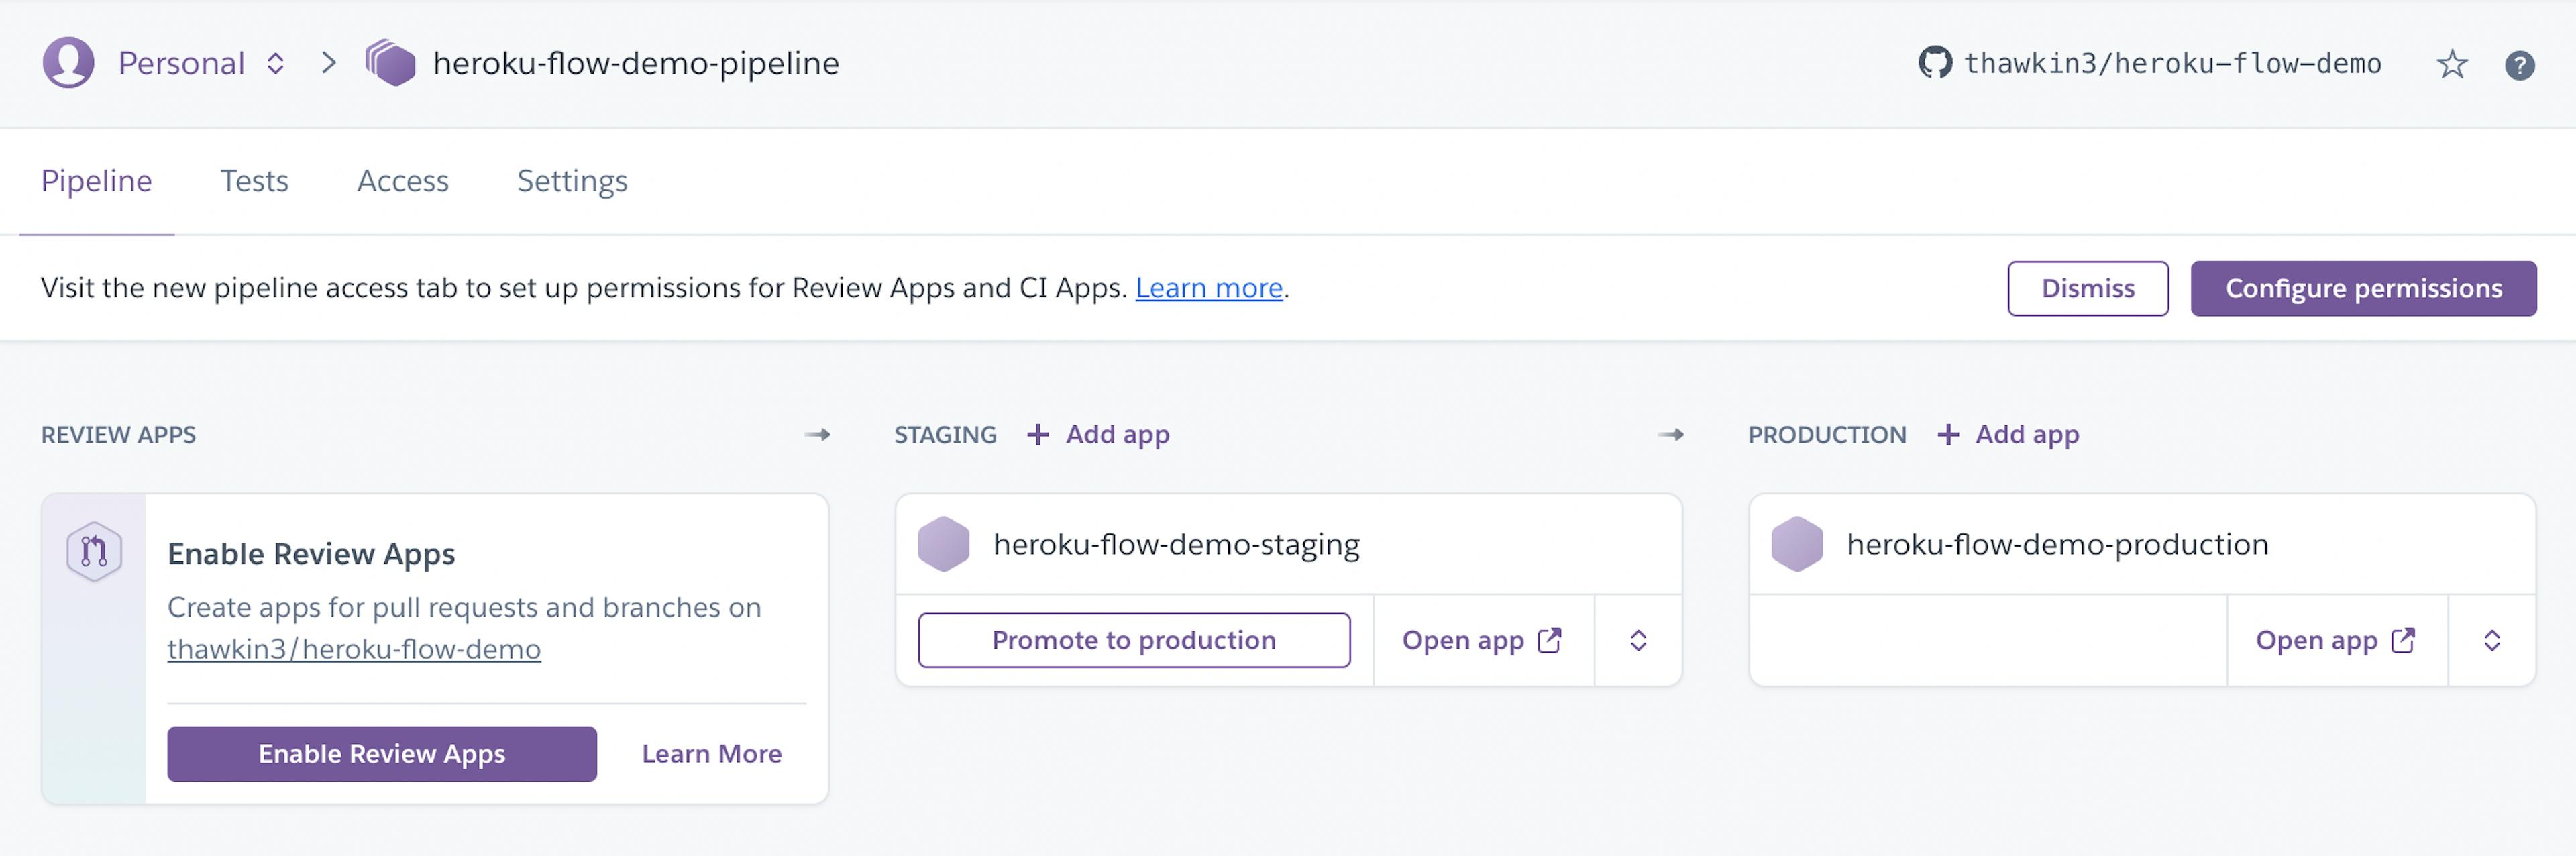 Heroku pipeline with a staging app and a production app